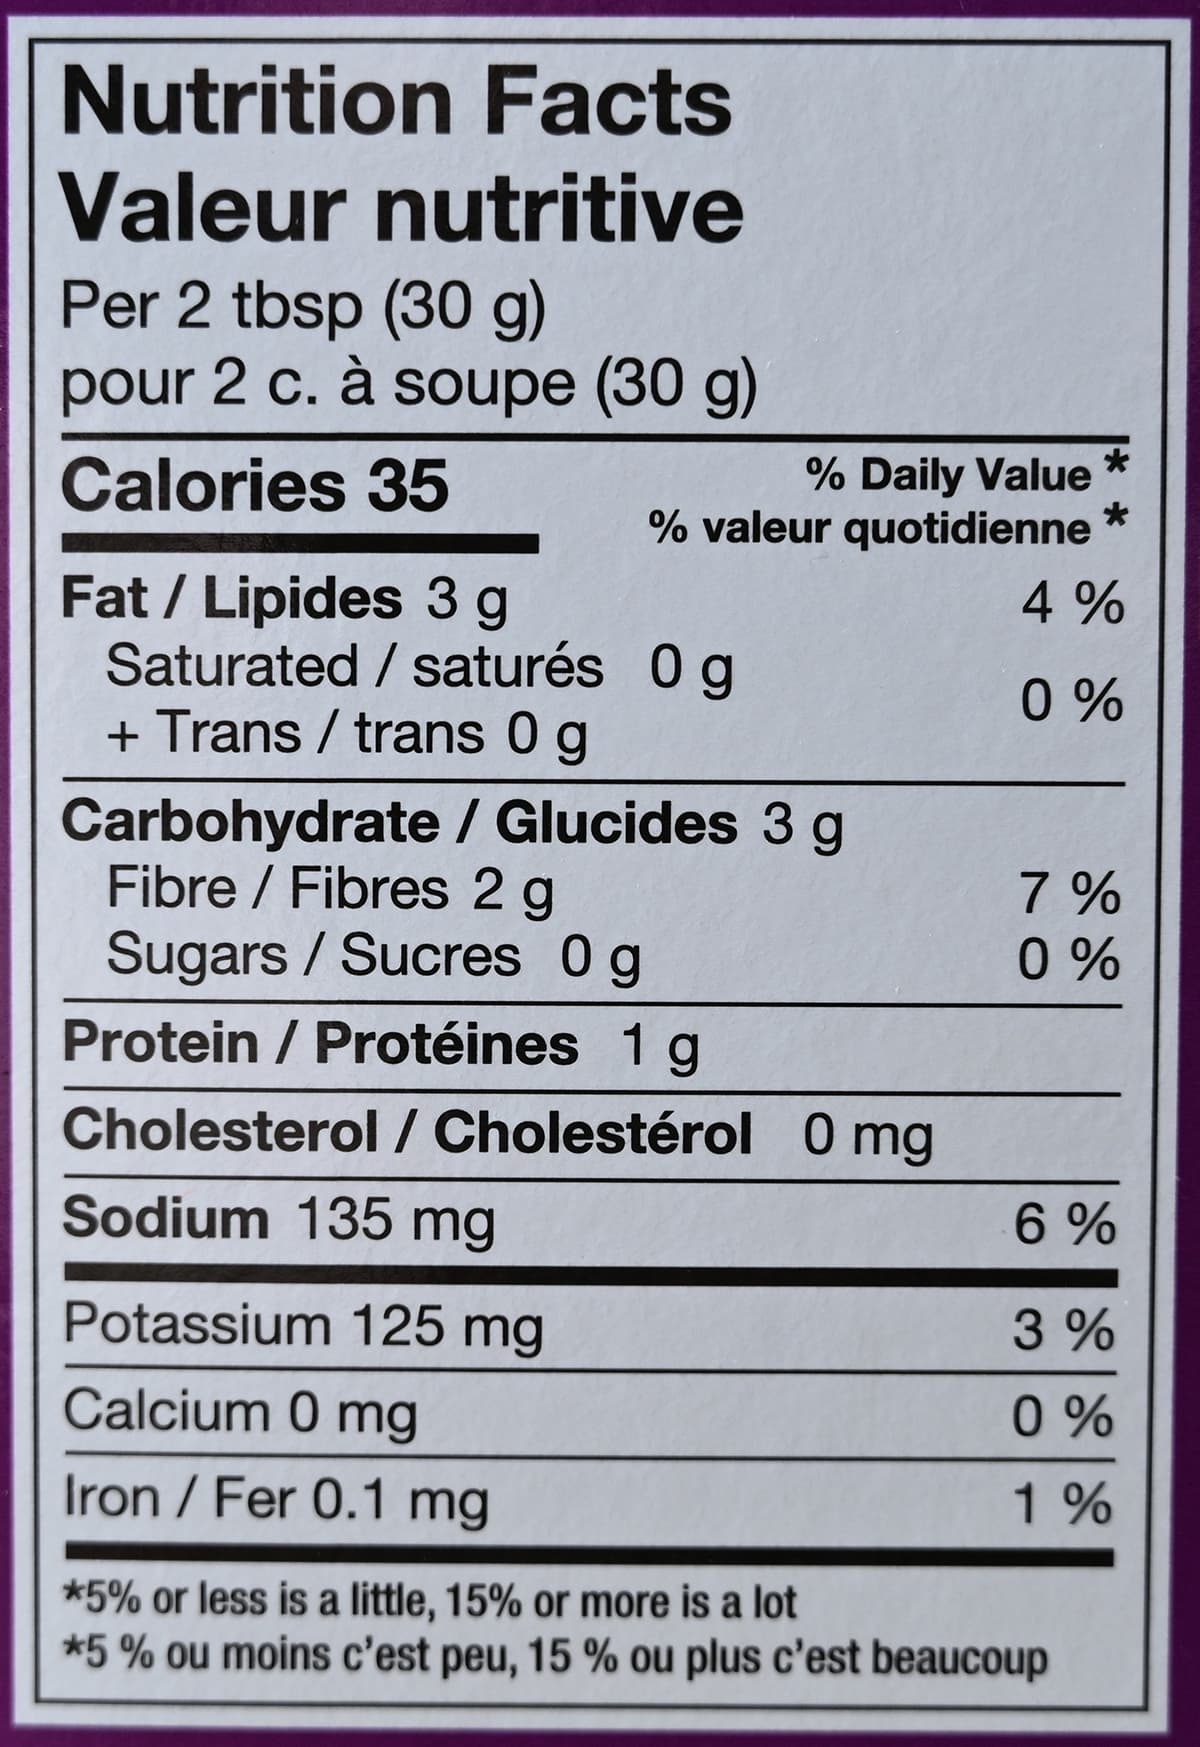 Image of the nutrition facts for the guacamole from the back of the box.